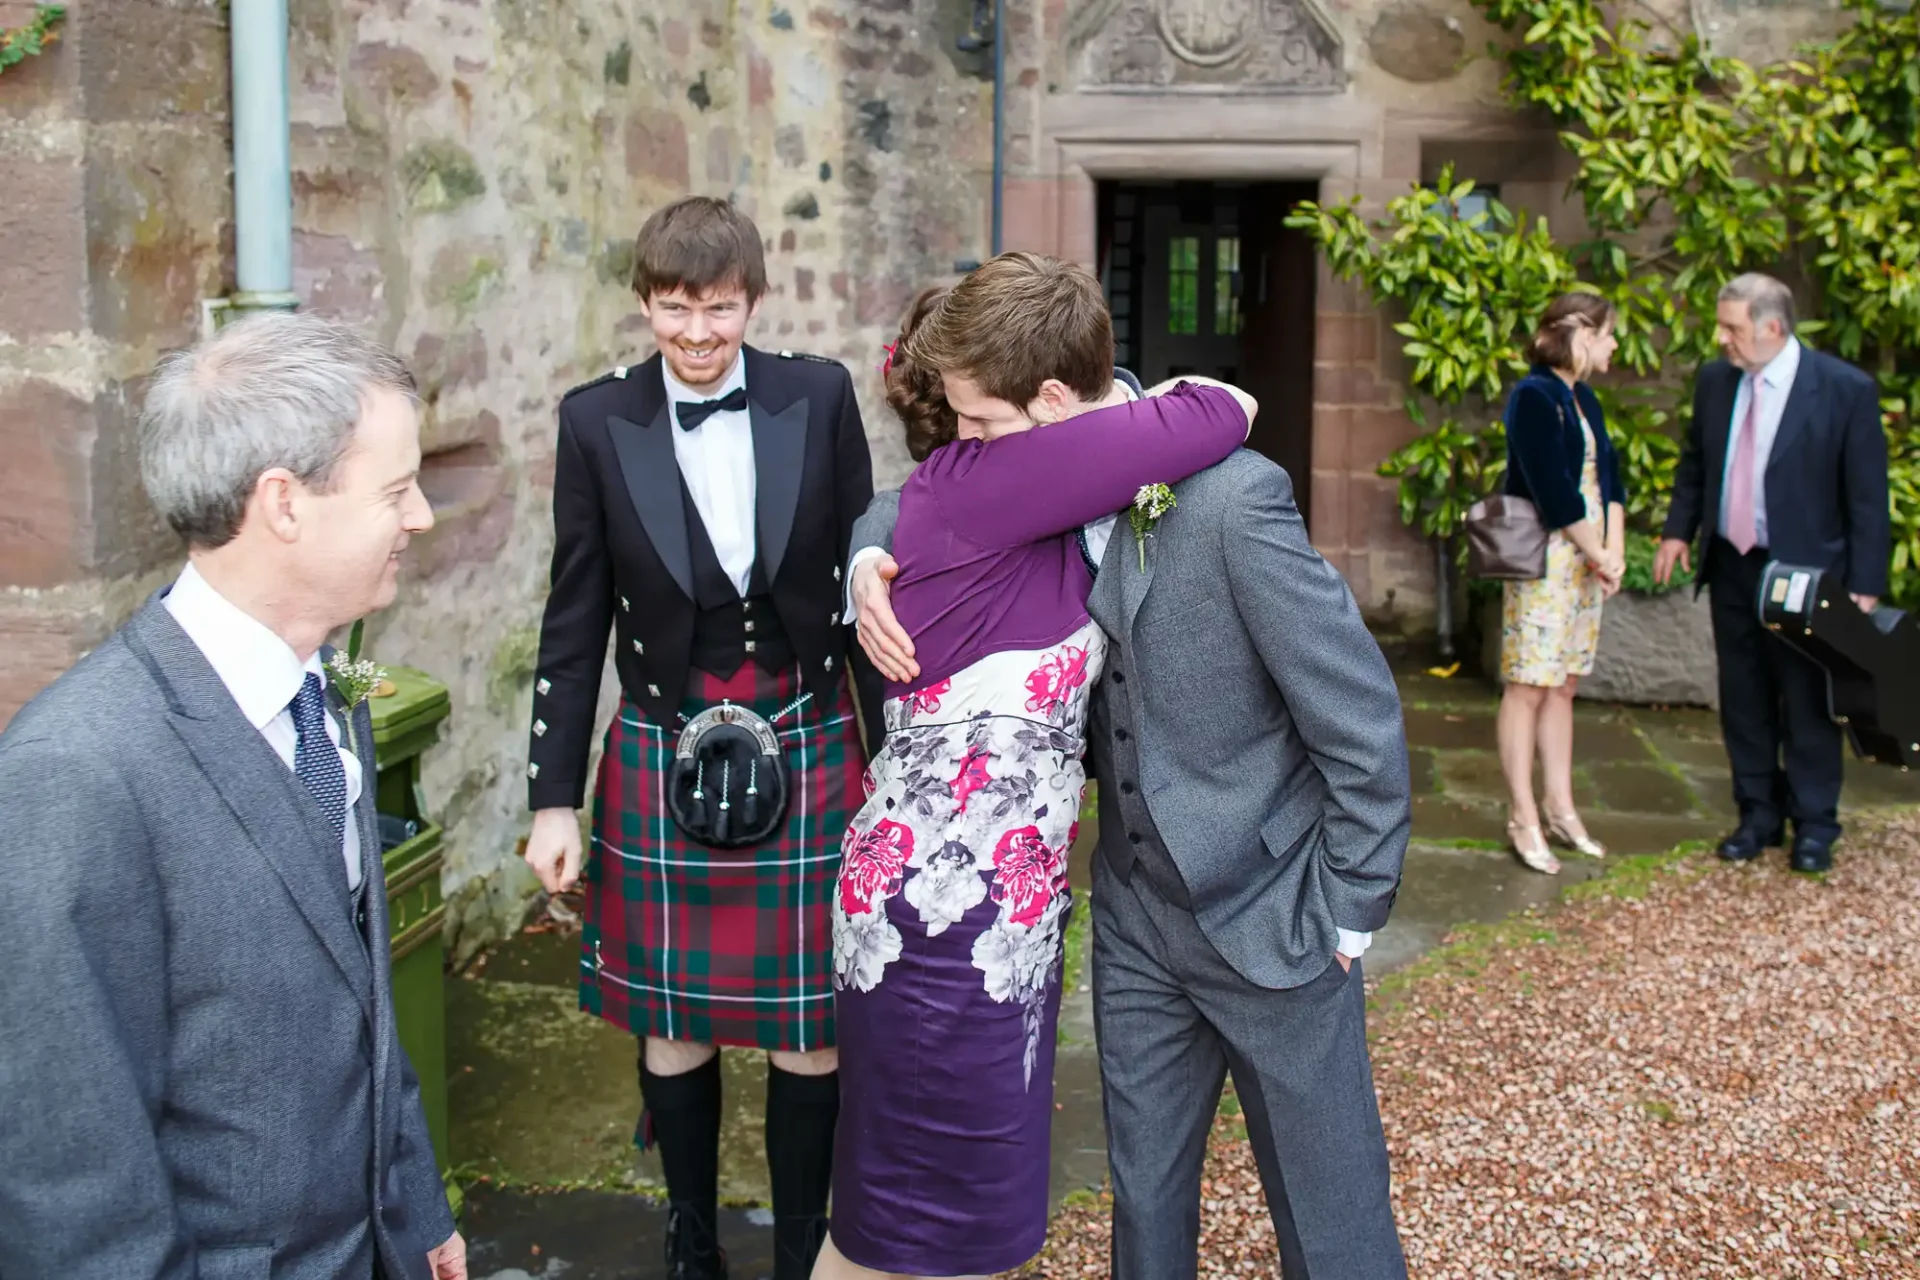 Two men embrace warmly at an event, one in a tartan kilt, while another man and two women observe, all dressed in formal wear, outside a stone building with vines.